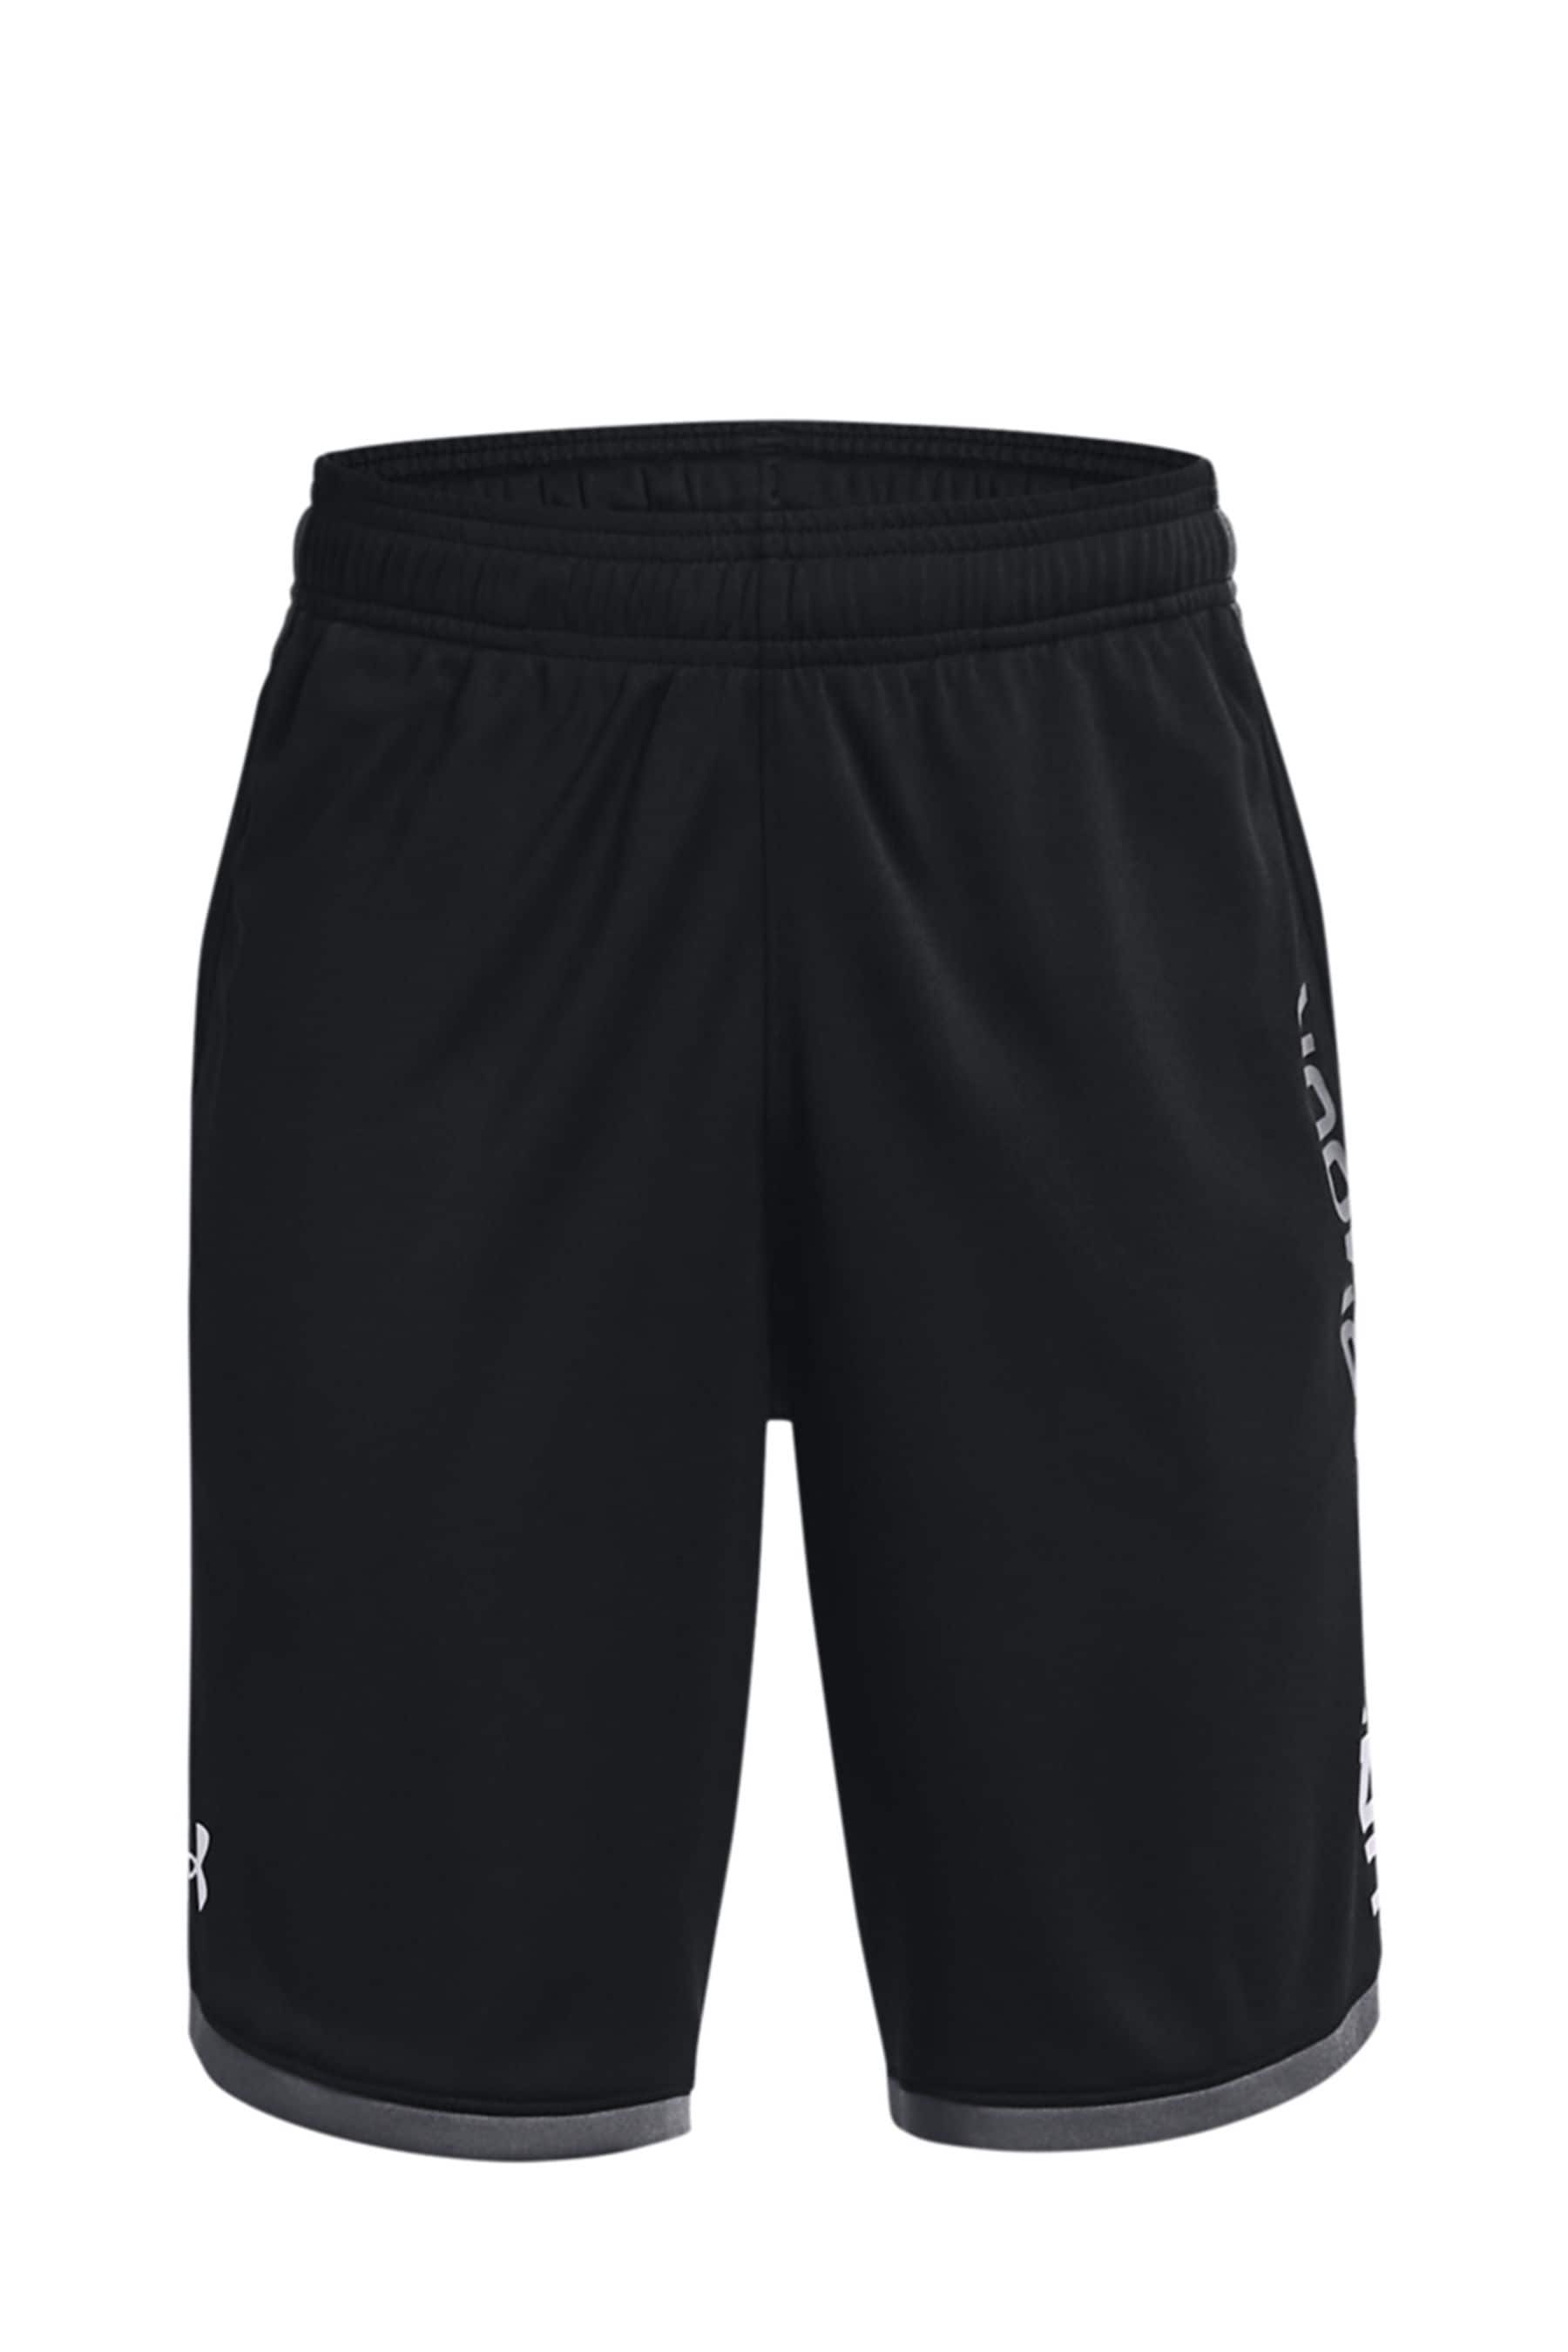 Buy Under Armour Youth Stunt 3.0 Shorts from the Next UK online shop